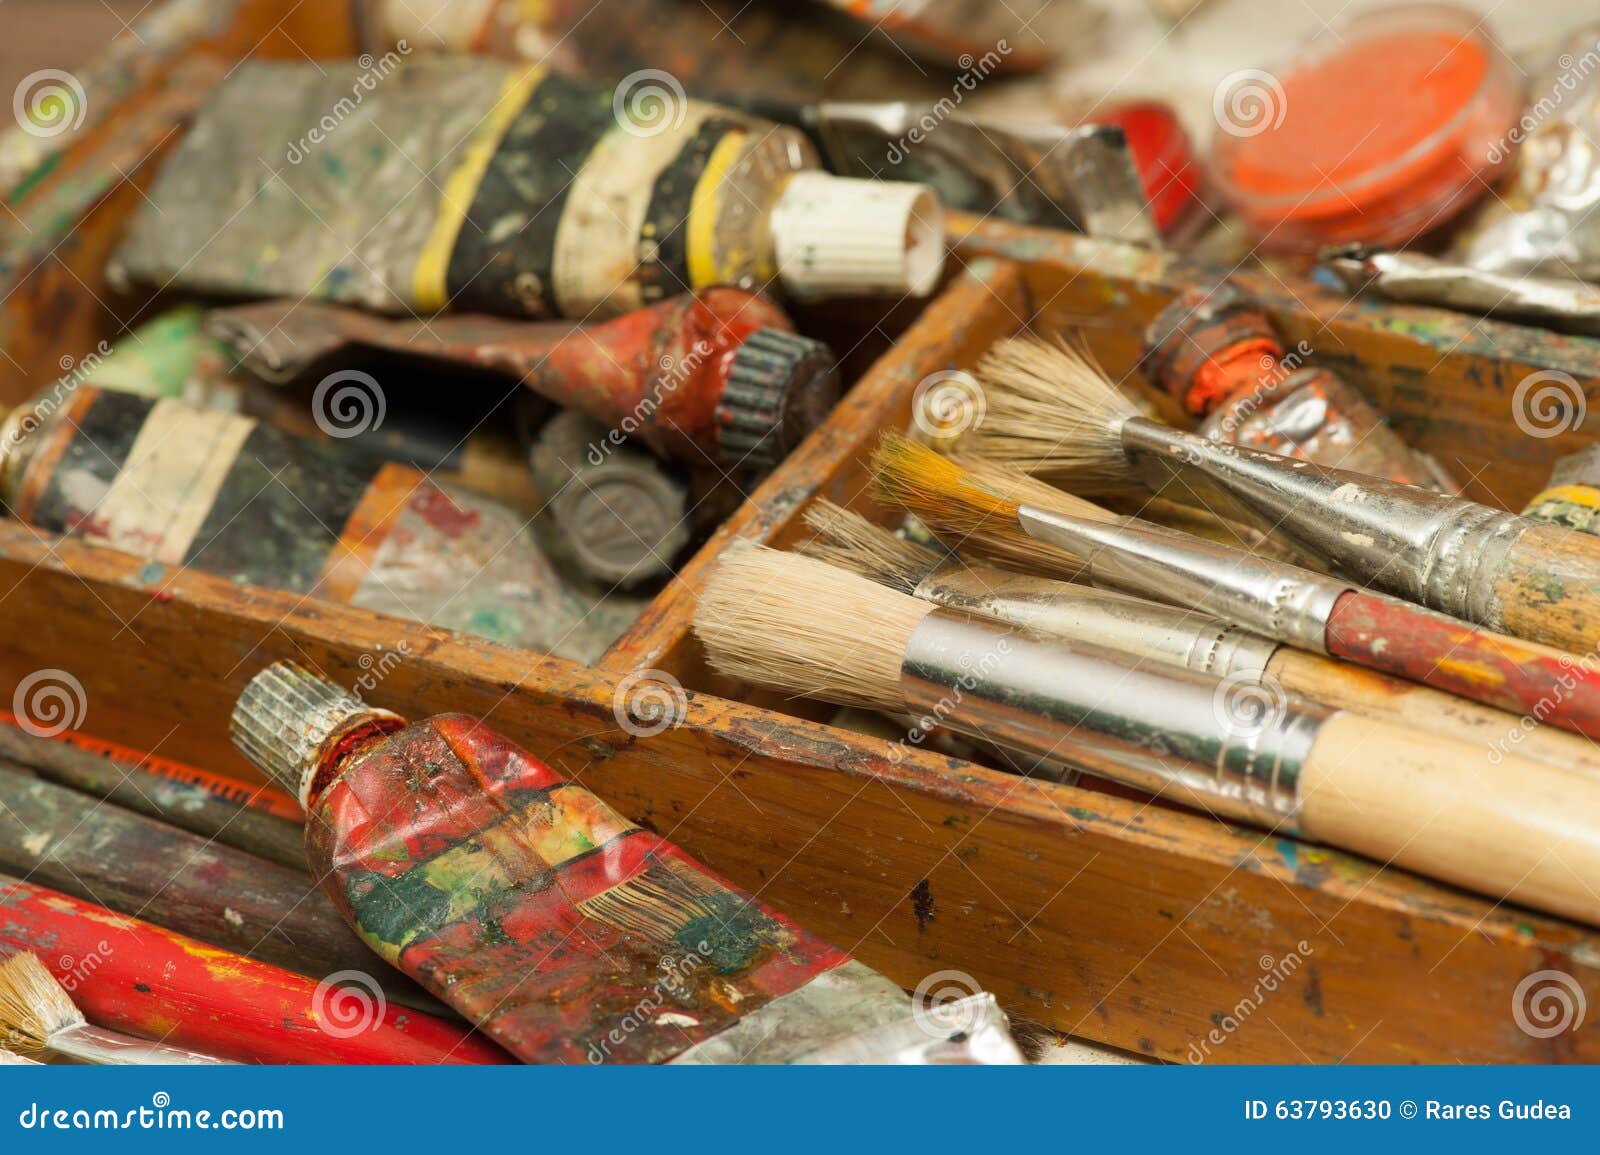 6,754 Oil Painting Supplies Images, Stock Photos, 3D objects, & Vectors